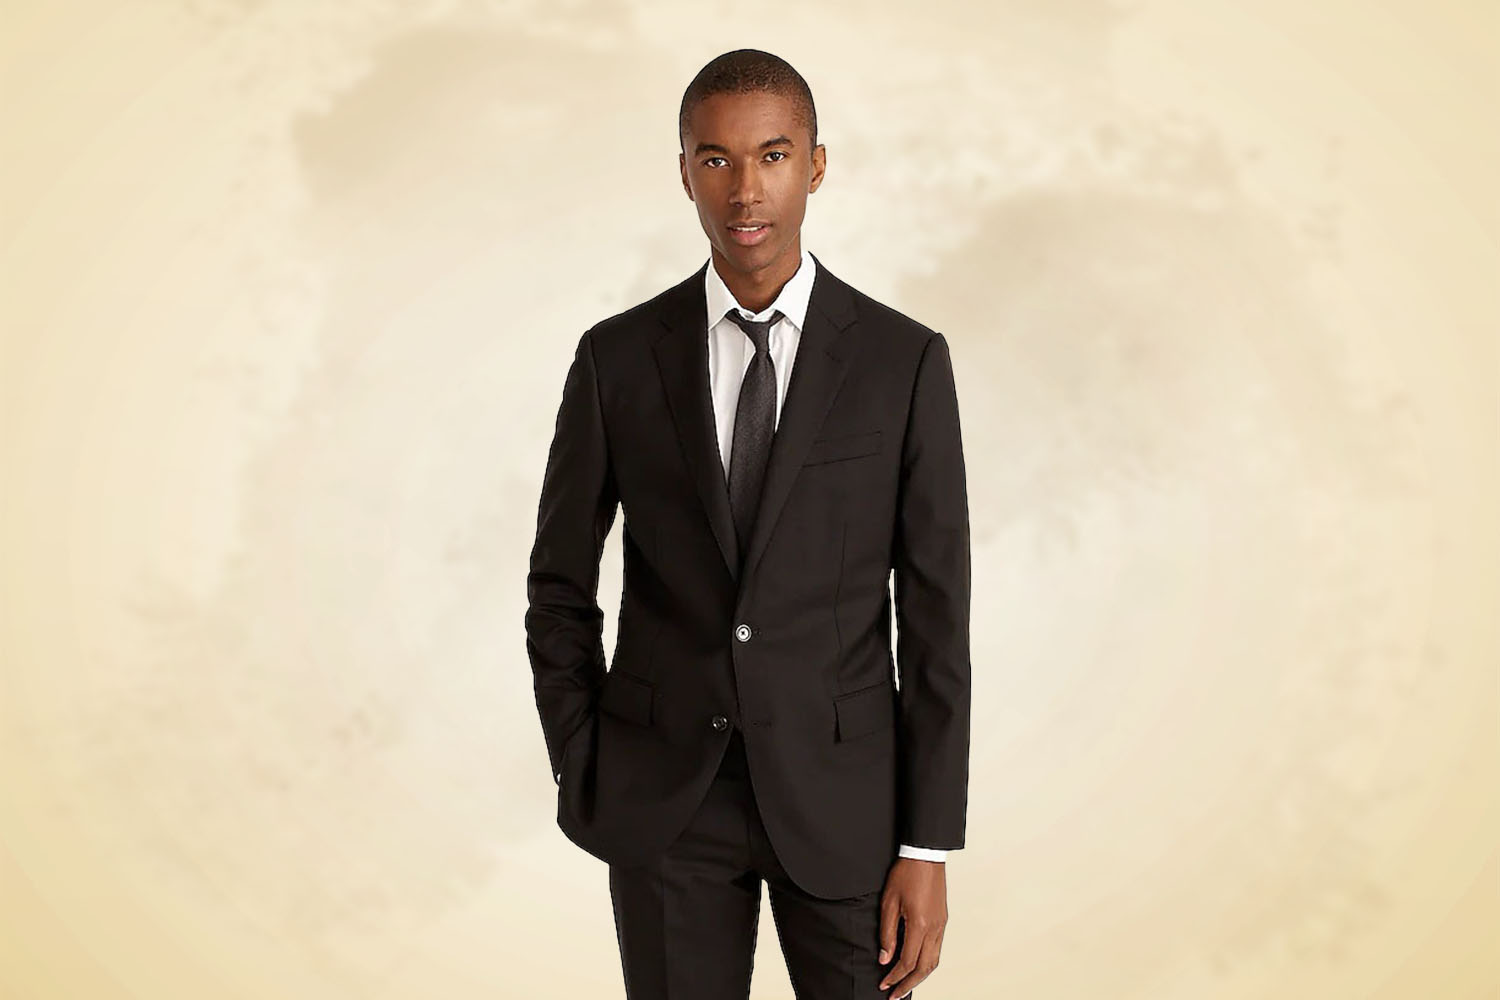 A man posing in a suit.